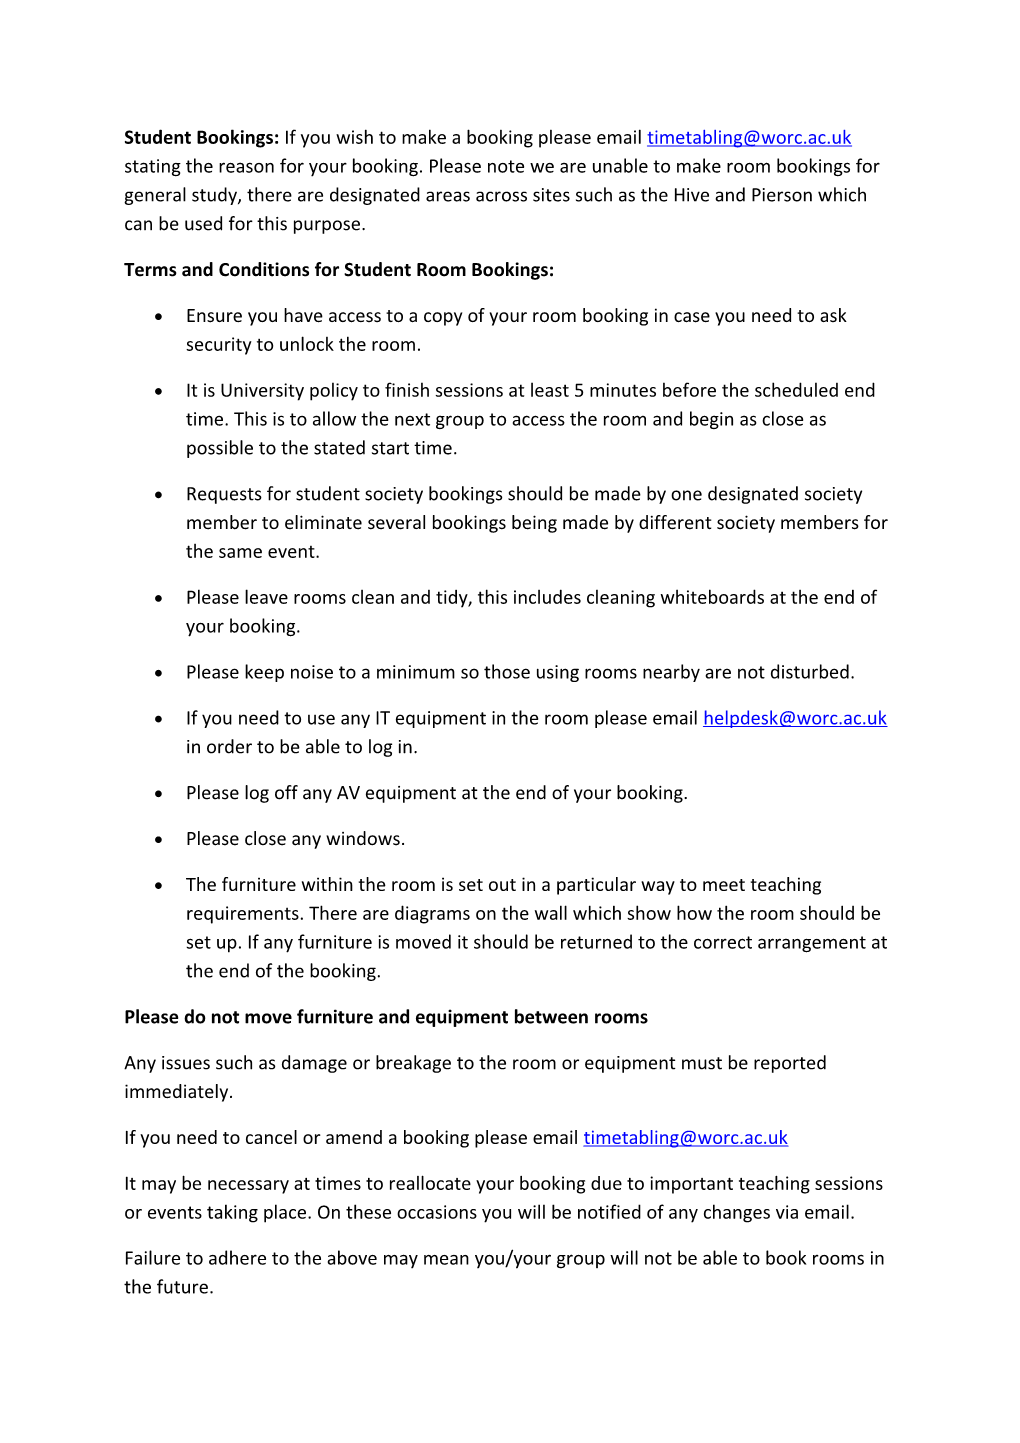 Terms and Conditions for Student Room Bookings